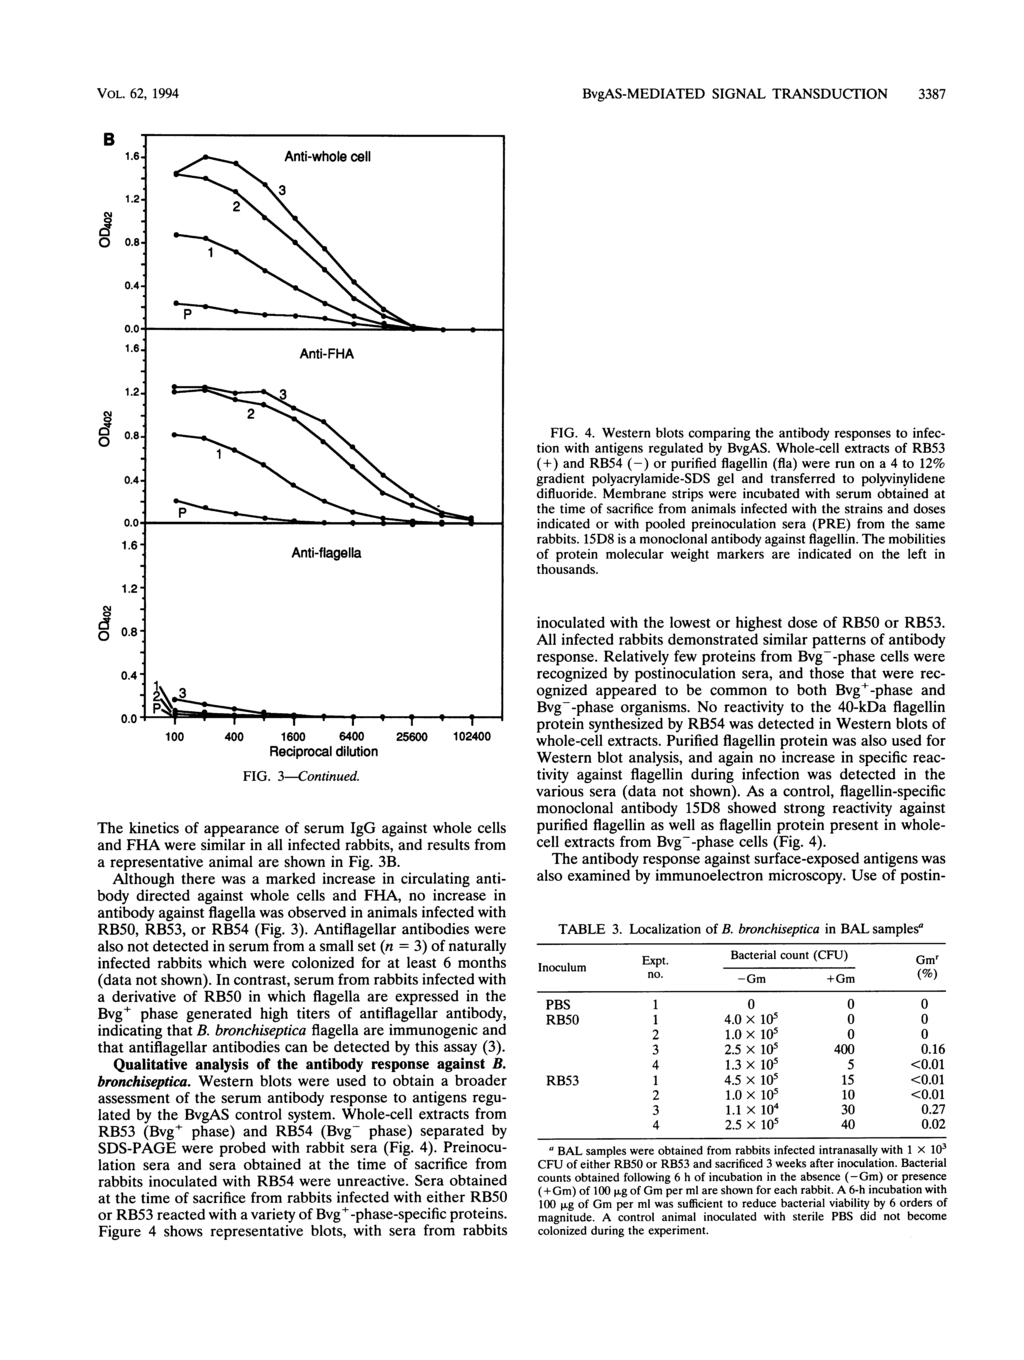 VOL. 62, 1994 B 1.6- Anti-whole cell 1.2.8 2 1.6. 3Anti-eHA. 1.2..4-.8-.4. 3 4At 1~~~~ 1.6ibody agis lael asosranti-flagella 1.2. cm oi.8,.4. 1 4 16 64 256 124 FIG. Reciprocal dilution 3-Continued.